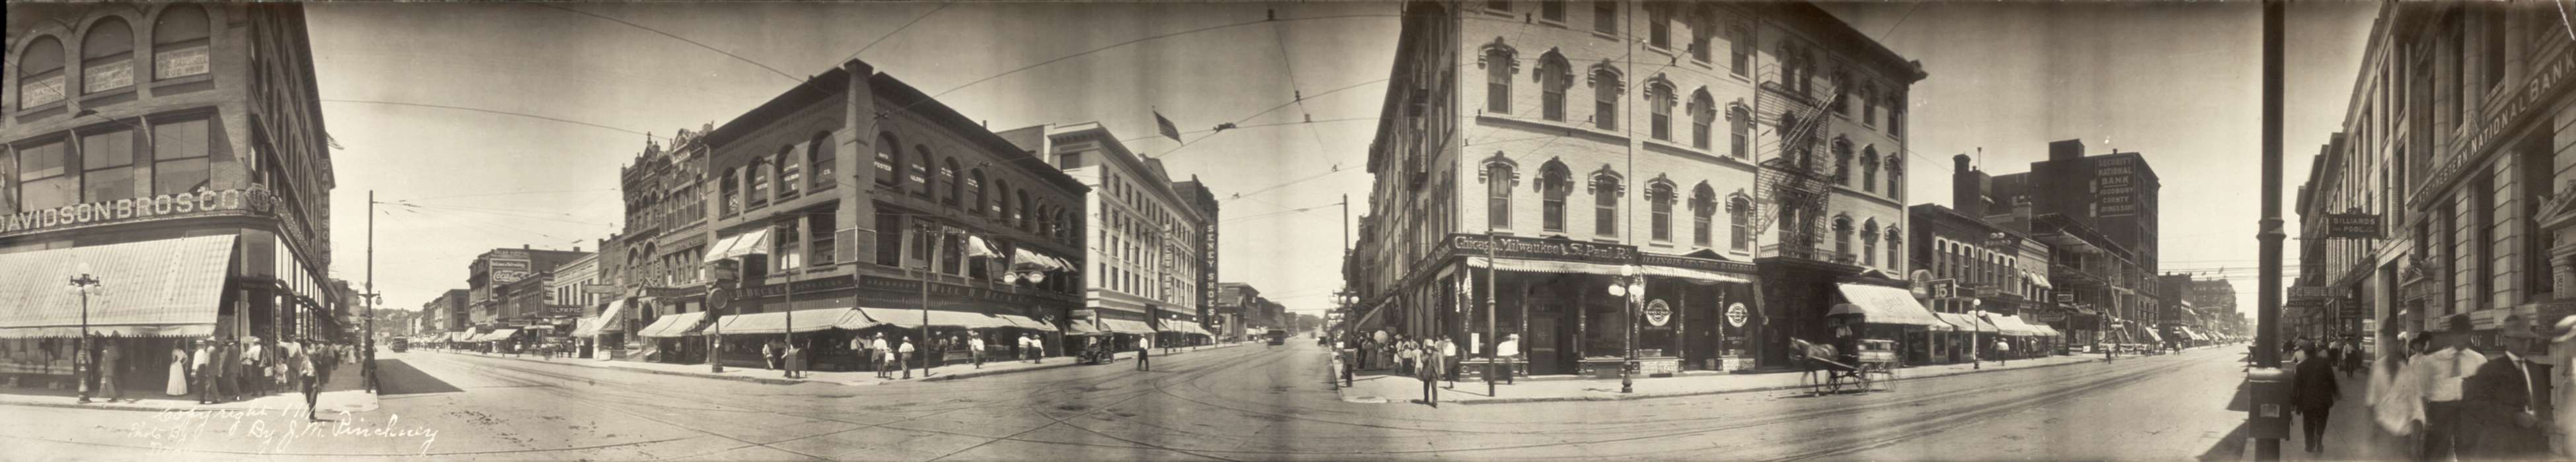 storefront, panorama, Iowa History, mainstreet, dirt street, buildings, storefront awning, Iowa, Library of Congress, Main Streets & Town Squares, Cities and Towns, history of Iowa